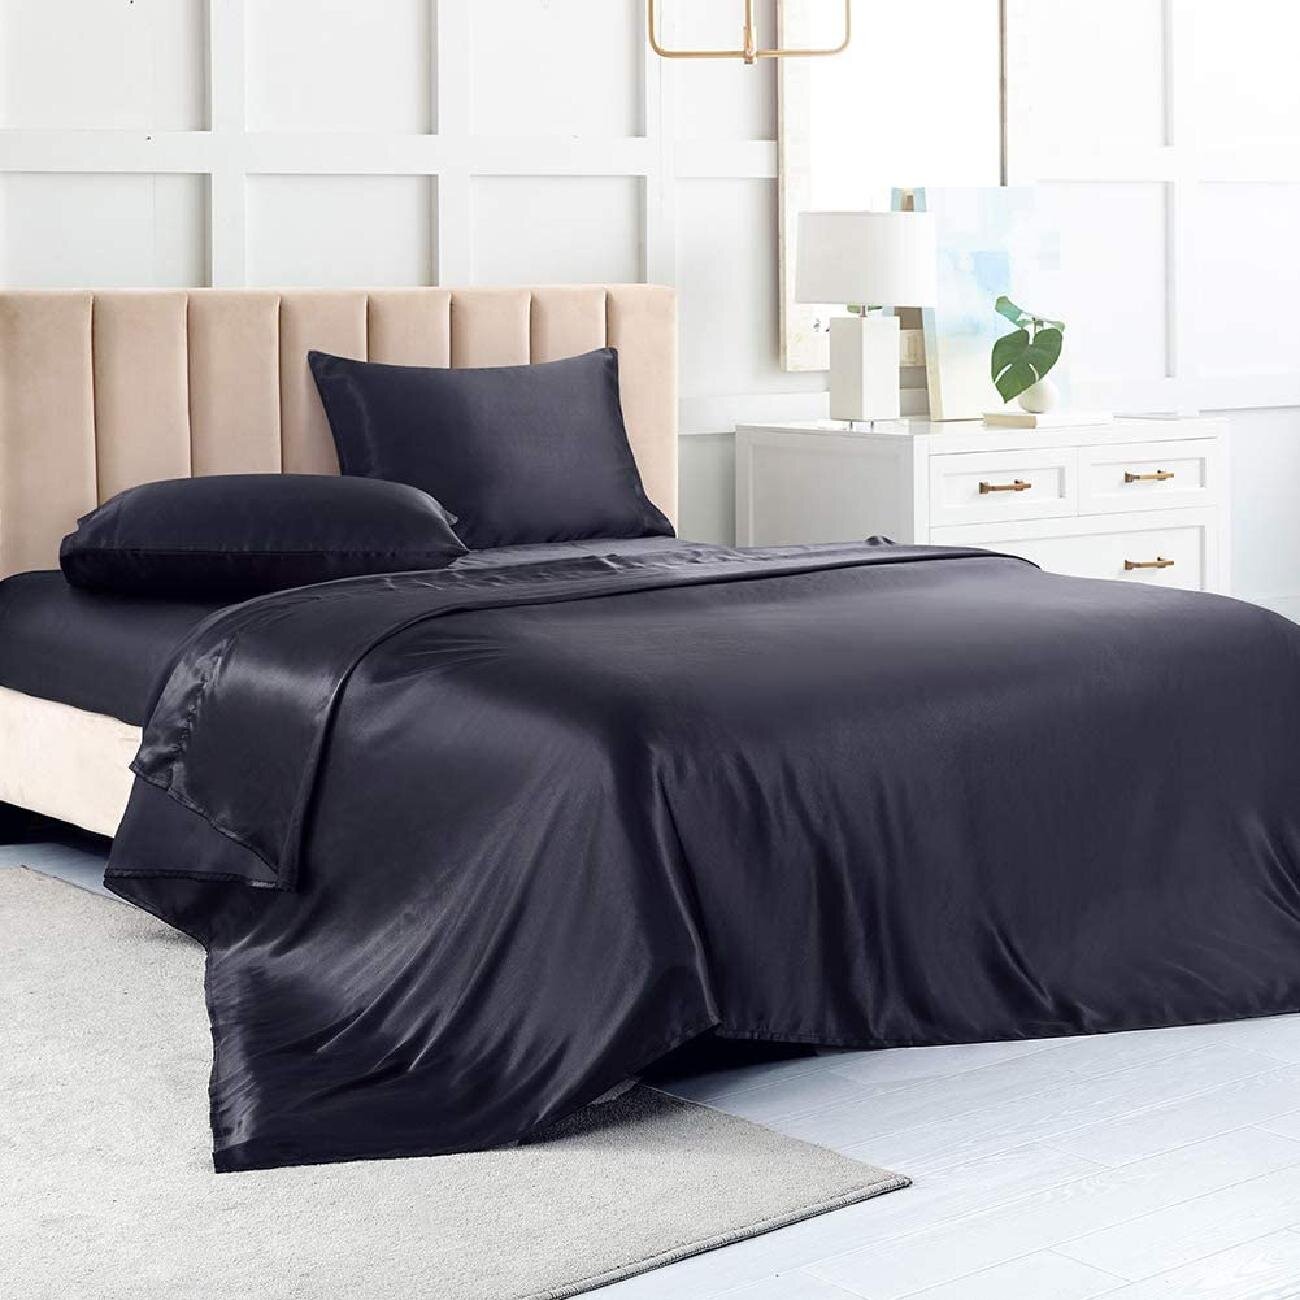 1 Piece Black Top Sheet Satin Flat Sheet Only Extra Soft Silk Flat Bed Sheets Sold Separately Twin Twin Flat Sheet Black